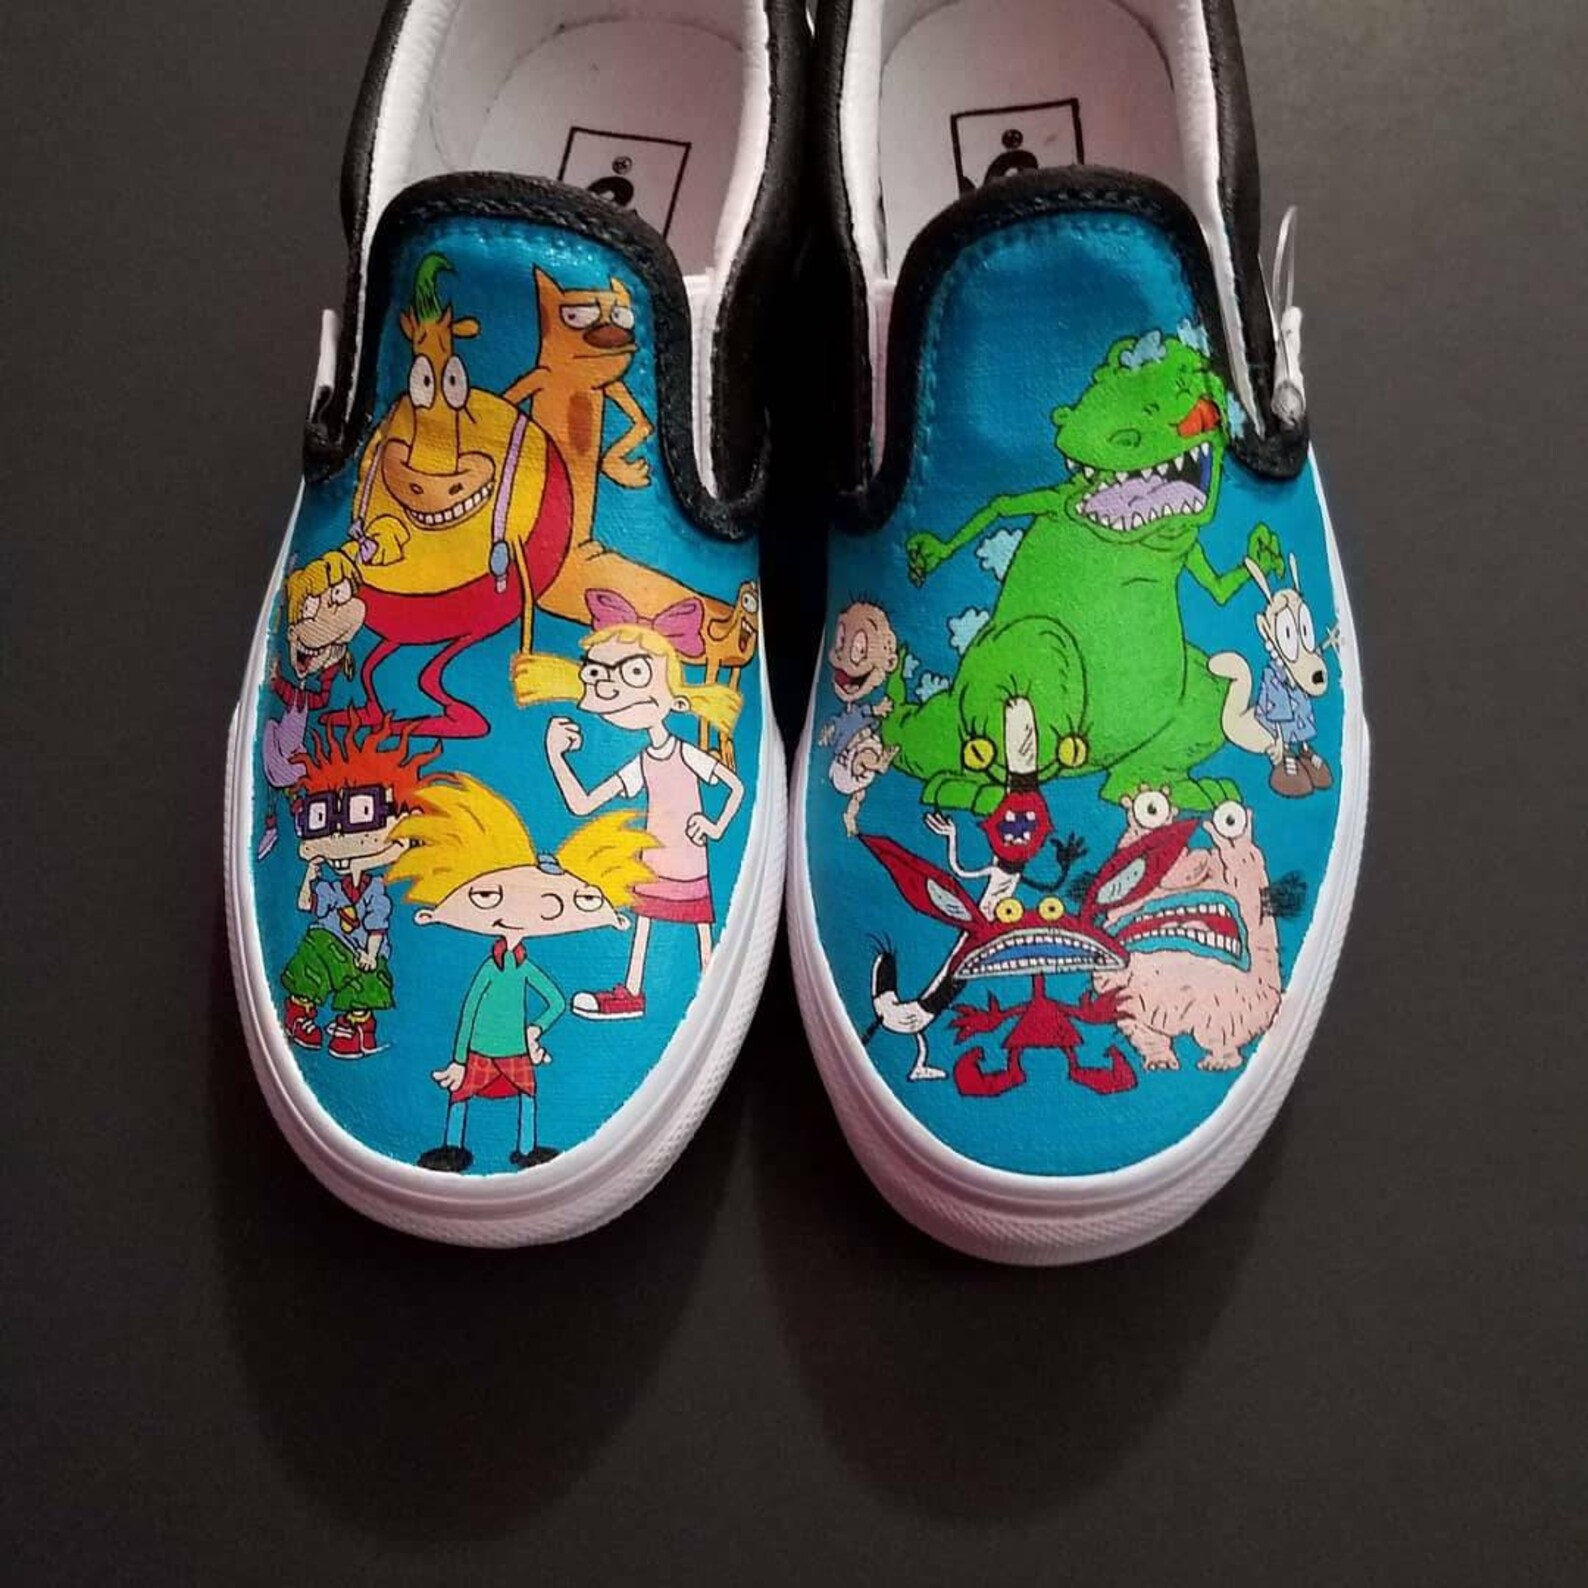 Rugrats Shoes - Etsy